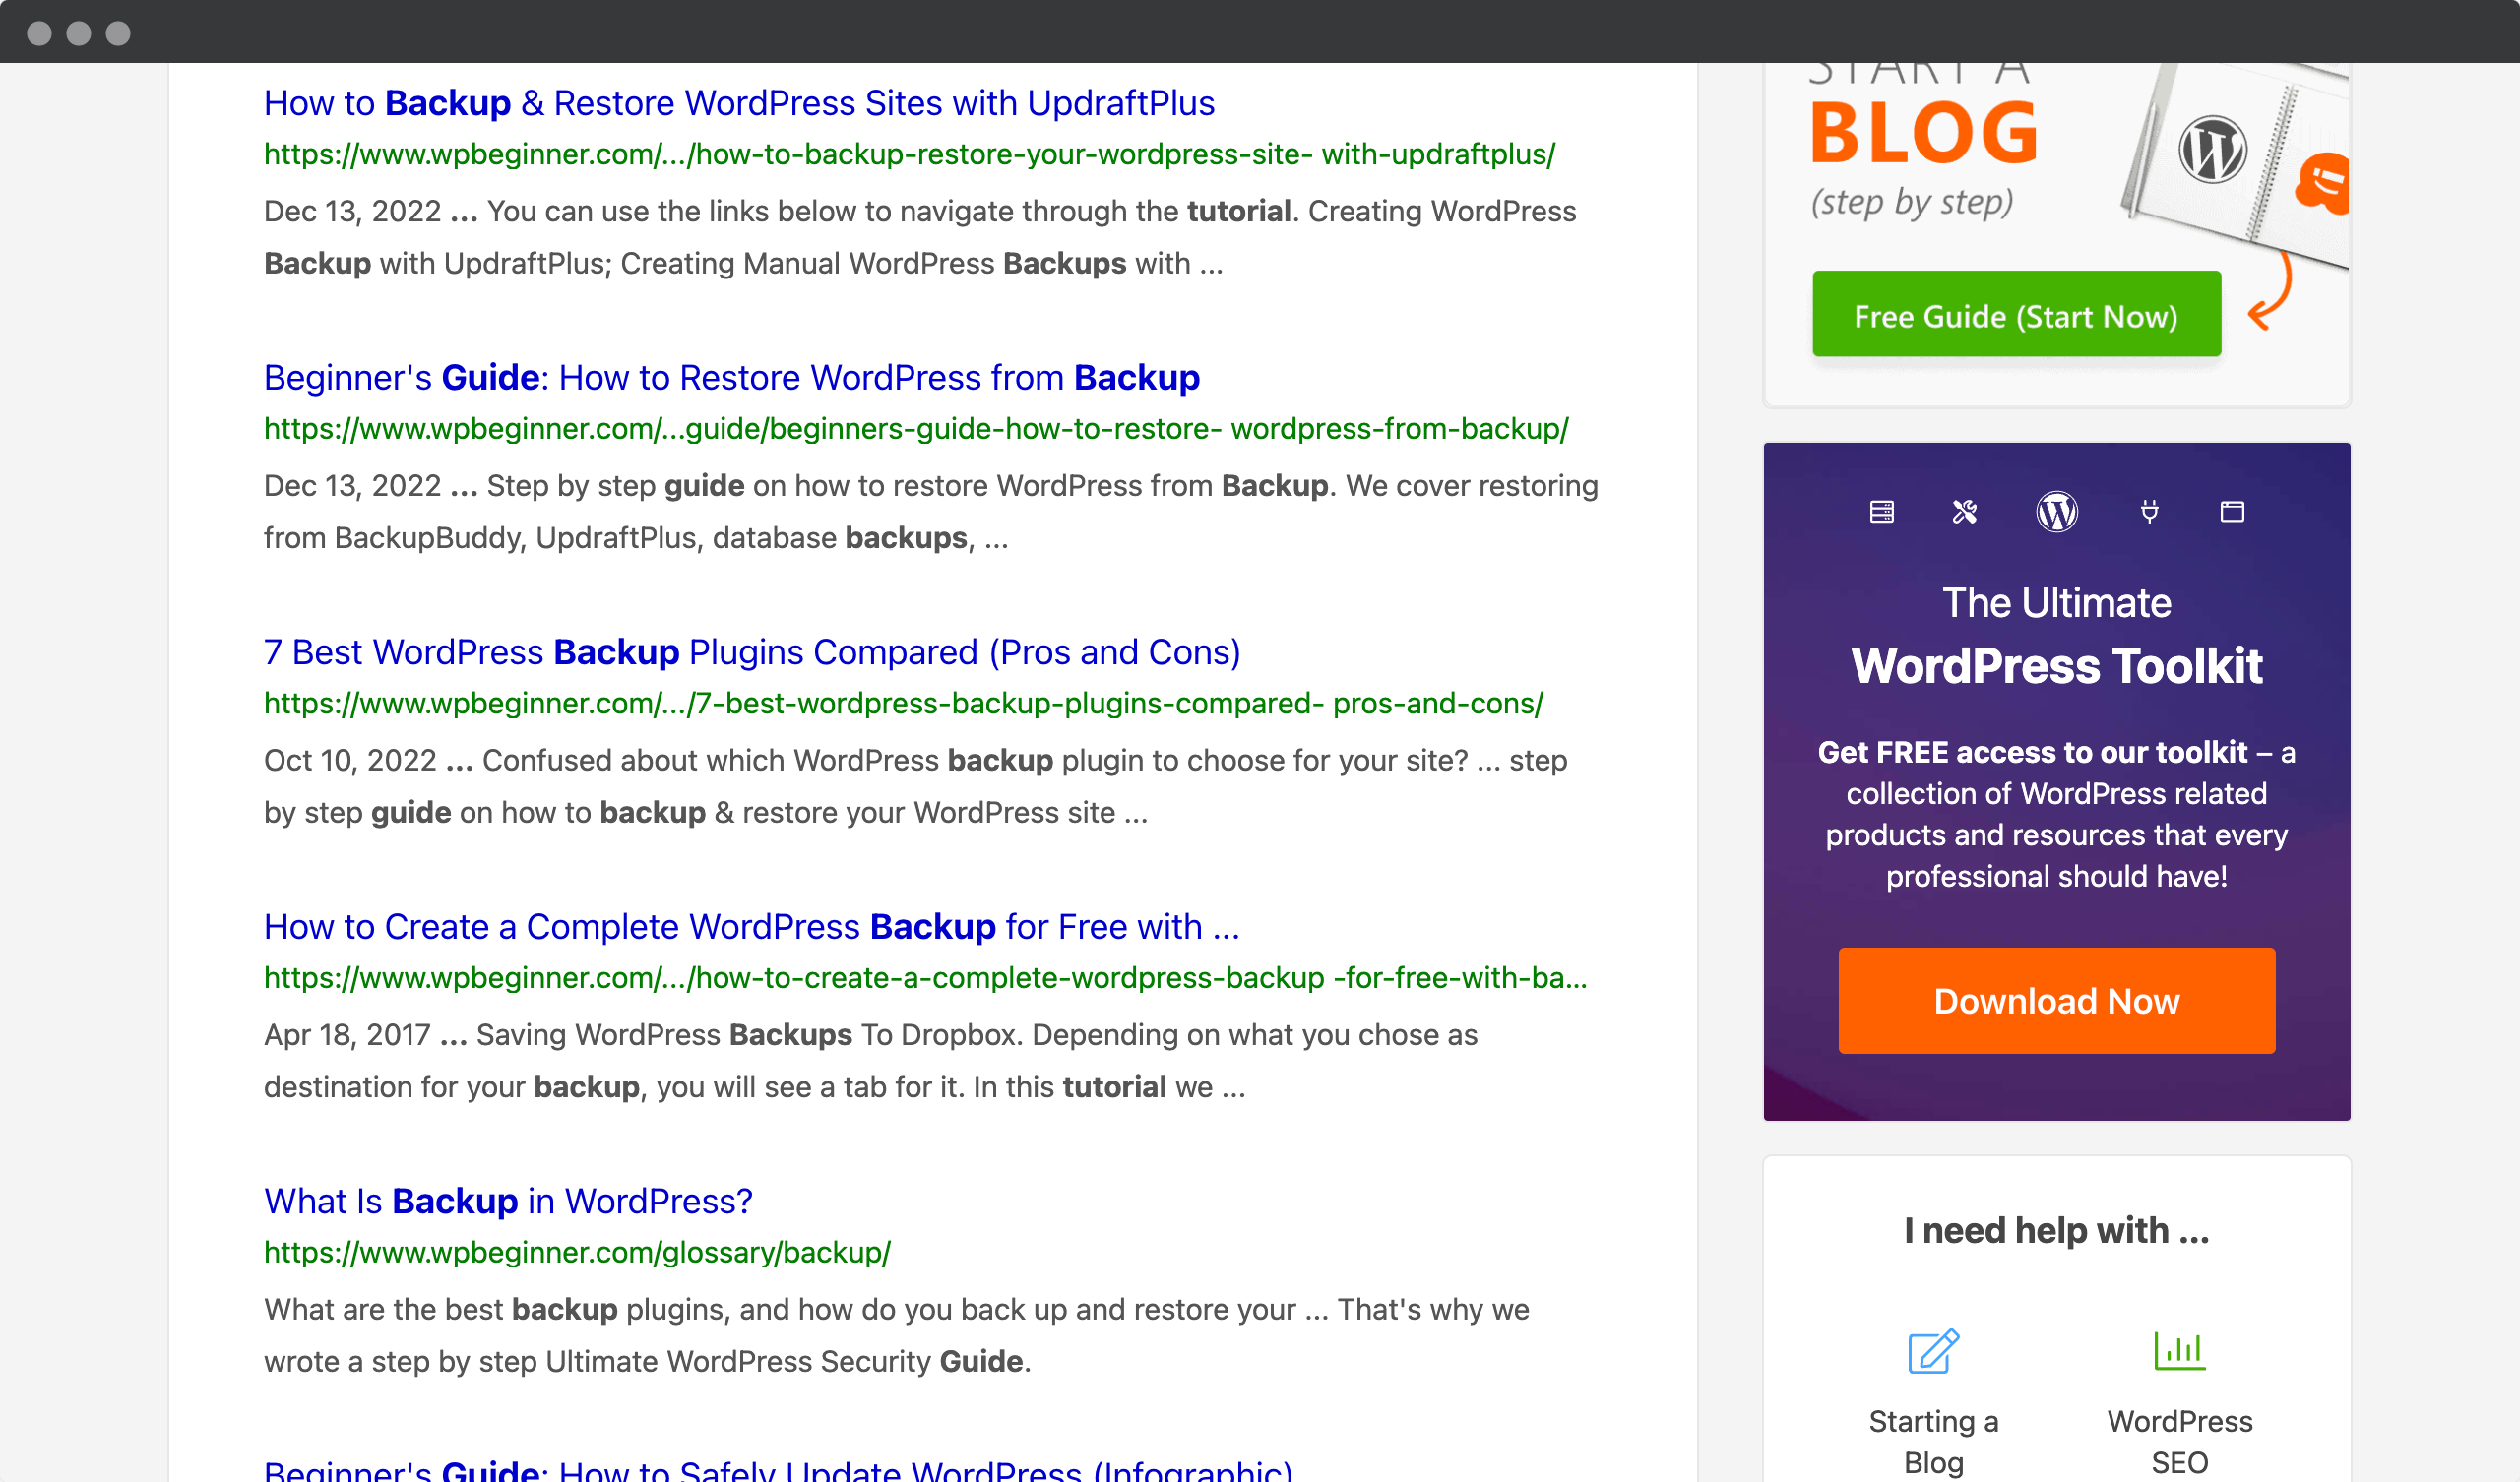 Screenshot of the WPBeginner page - a page with a list of tutorials for backing up WordPress websites.